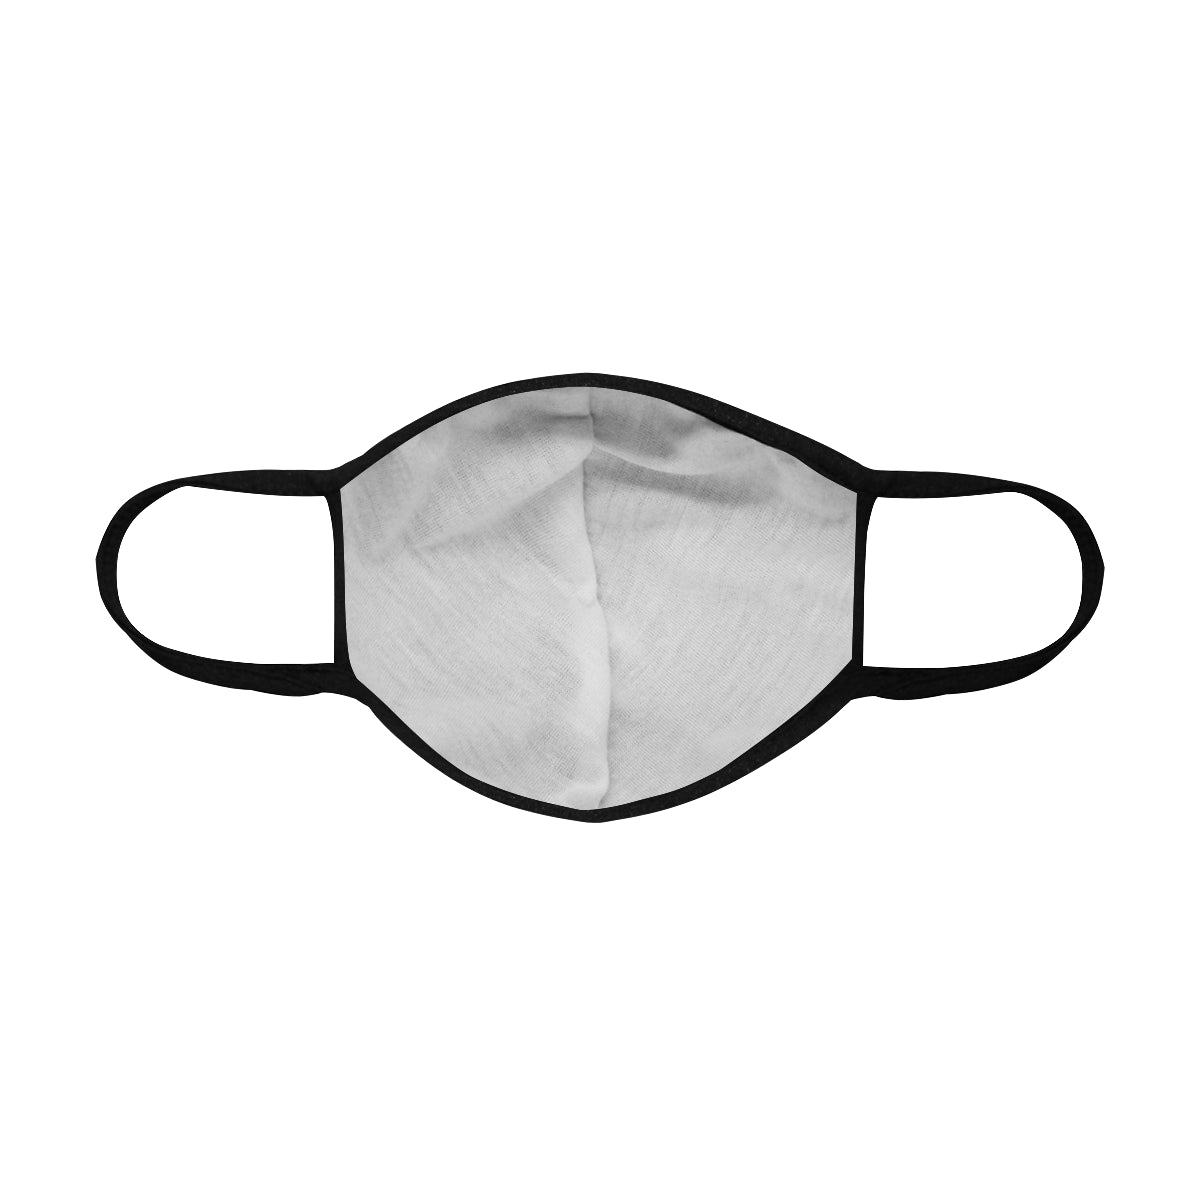 flyersetcinc Sky Blue Galaxy Cotton Fabric Face Mask with filter slot (30 Filters Included) - Non-medical use